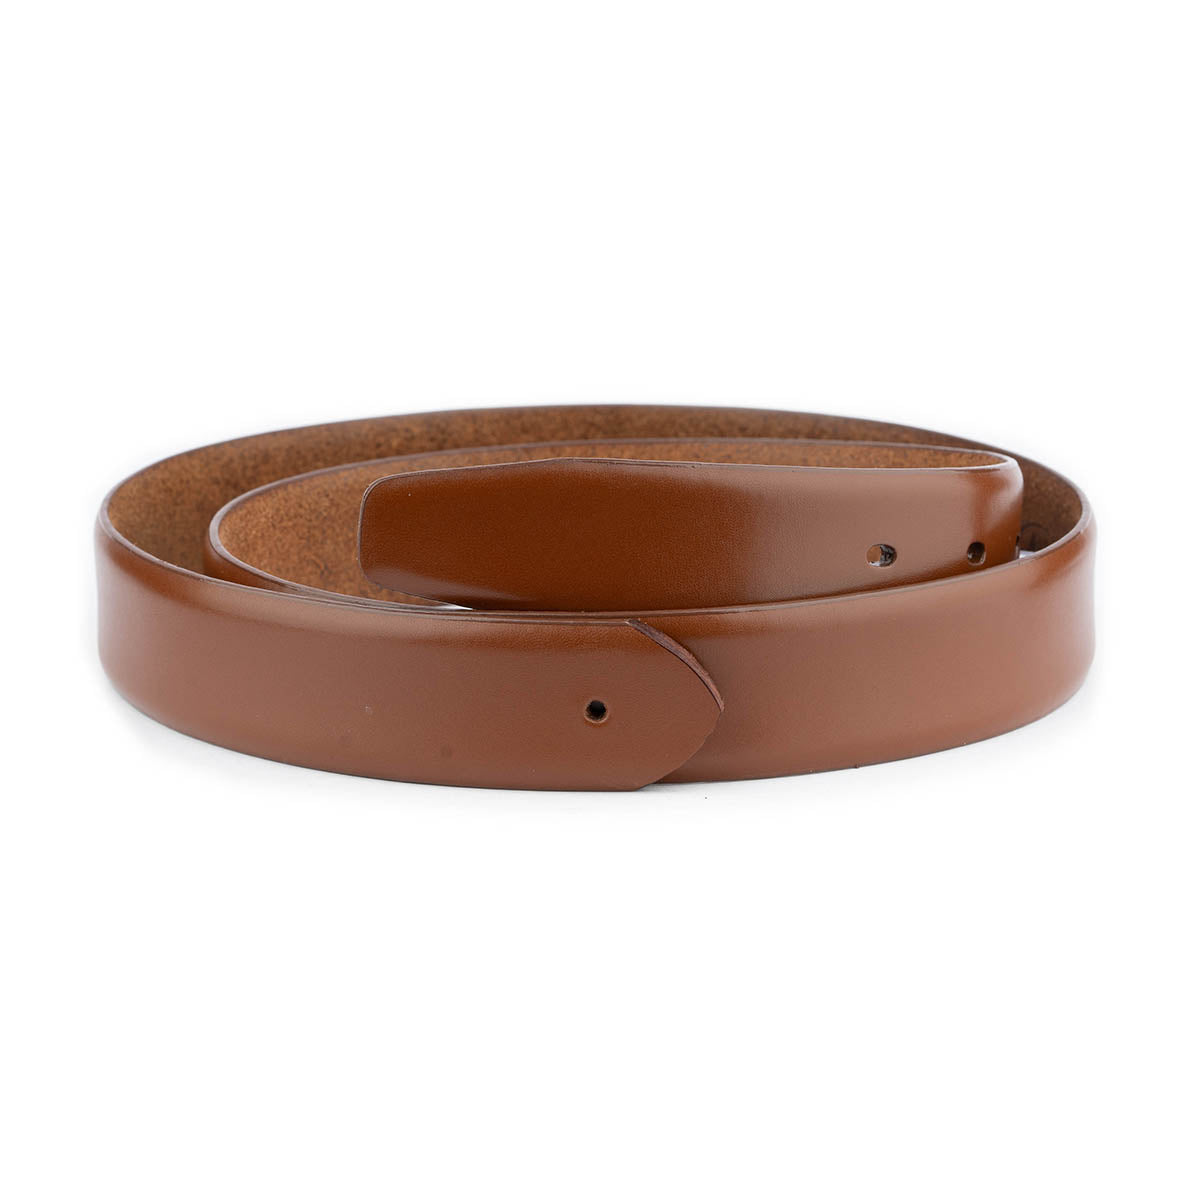 Medium Brown Leather Belt Strap with Hole For Ferragamo Mens Buckle Replacement